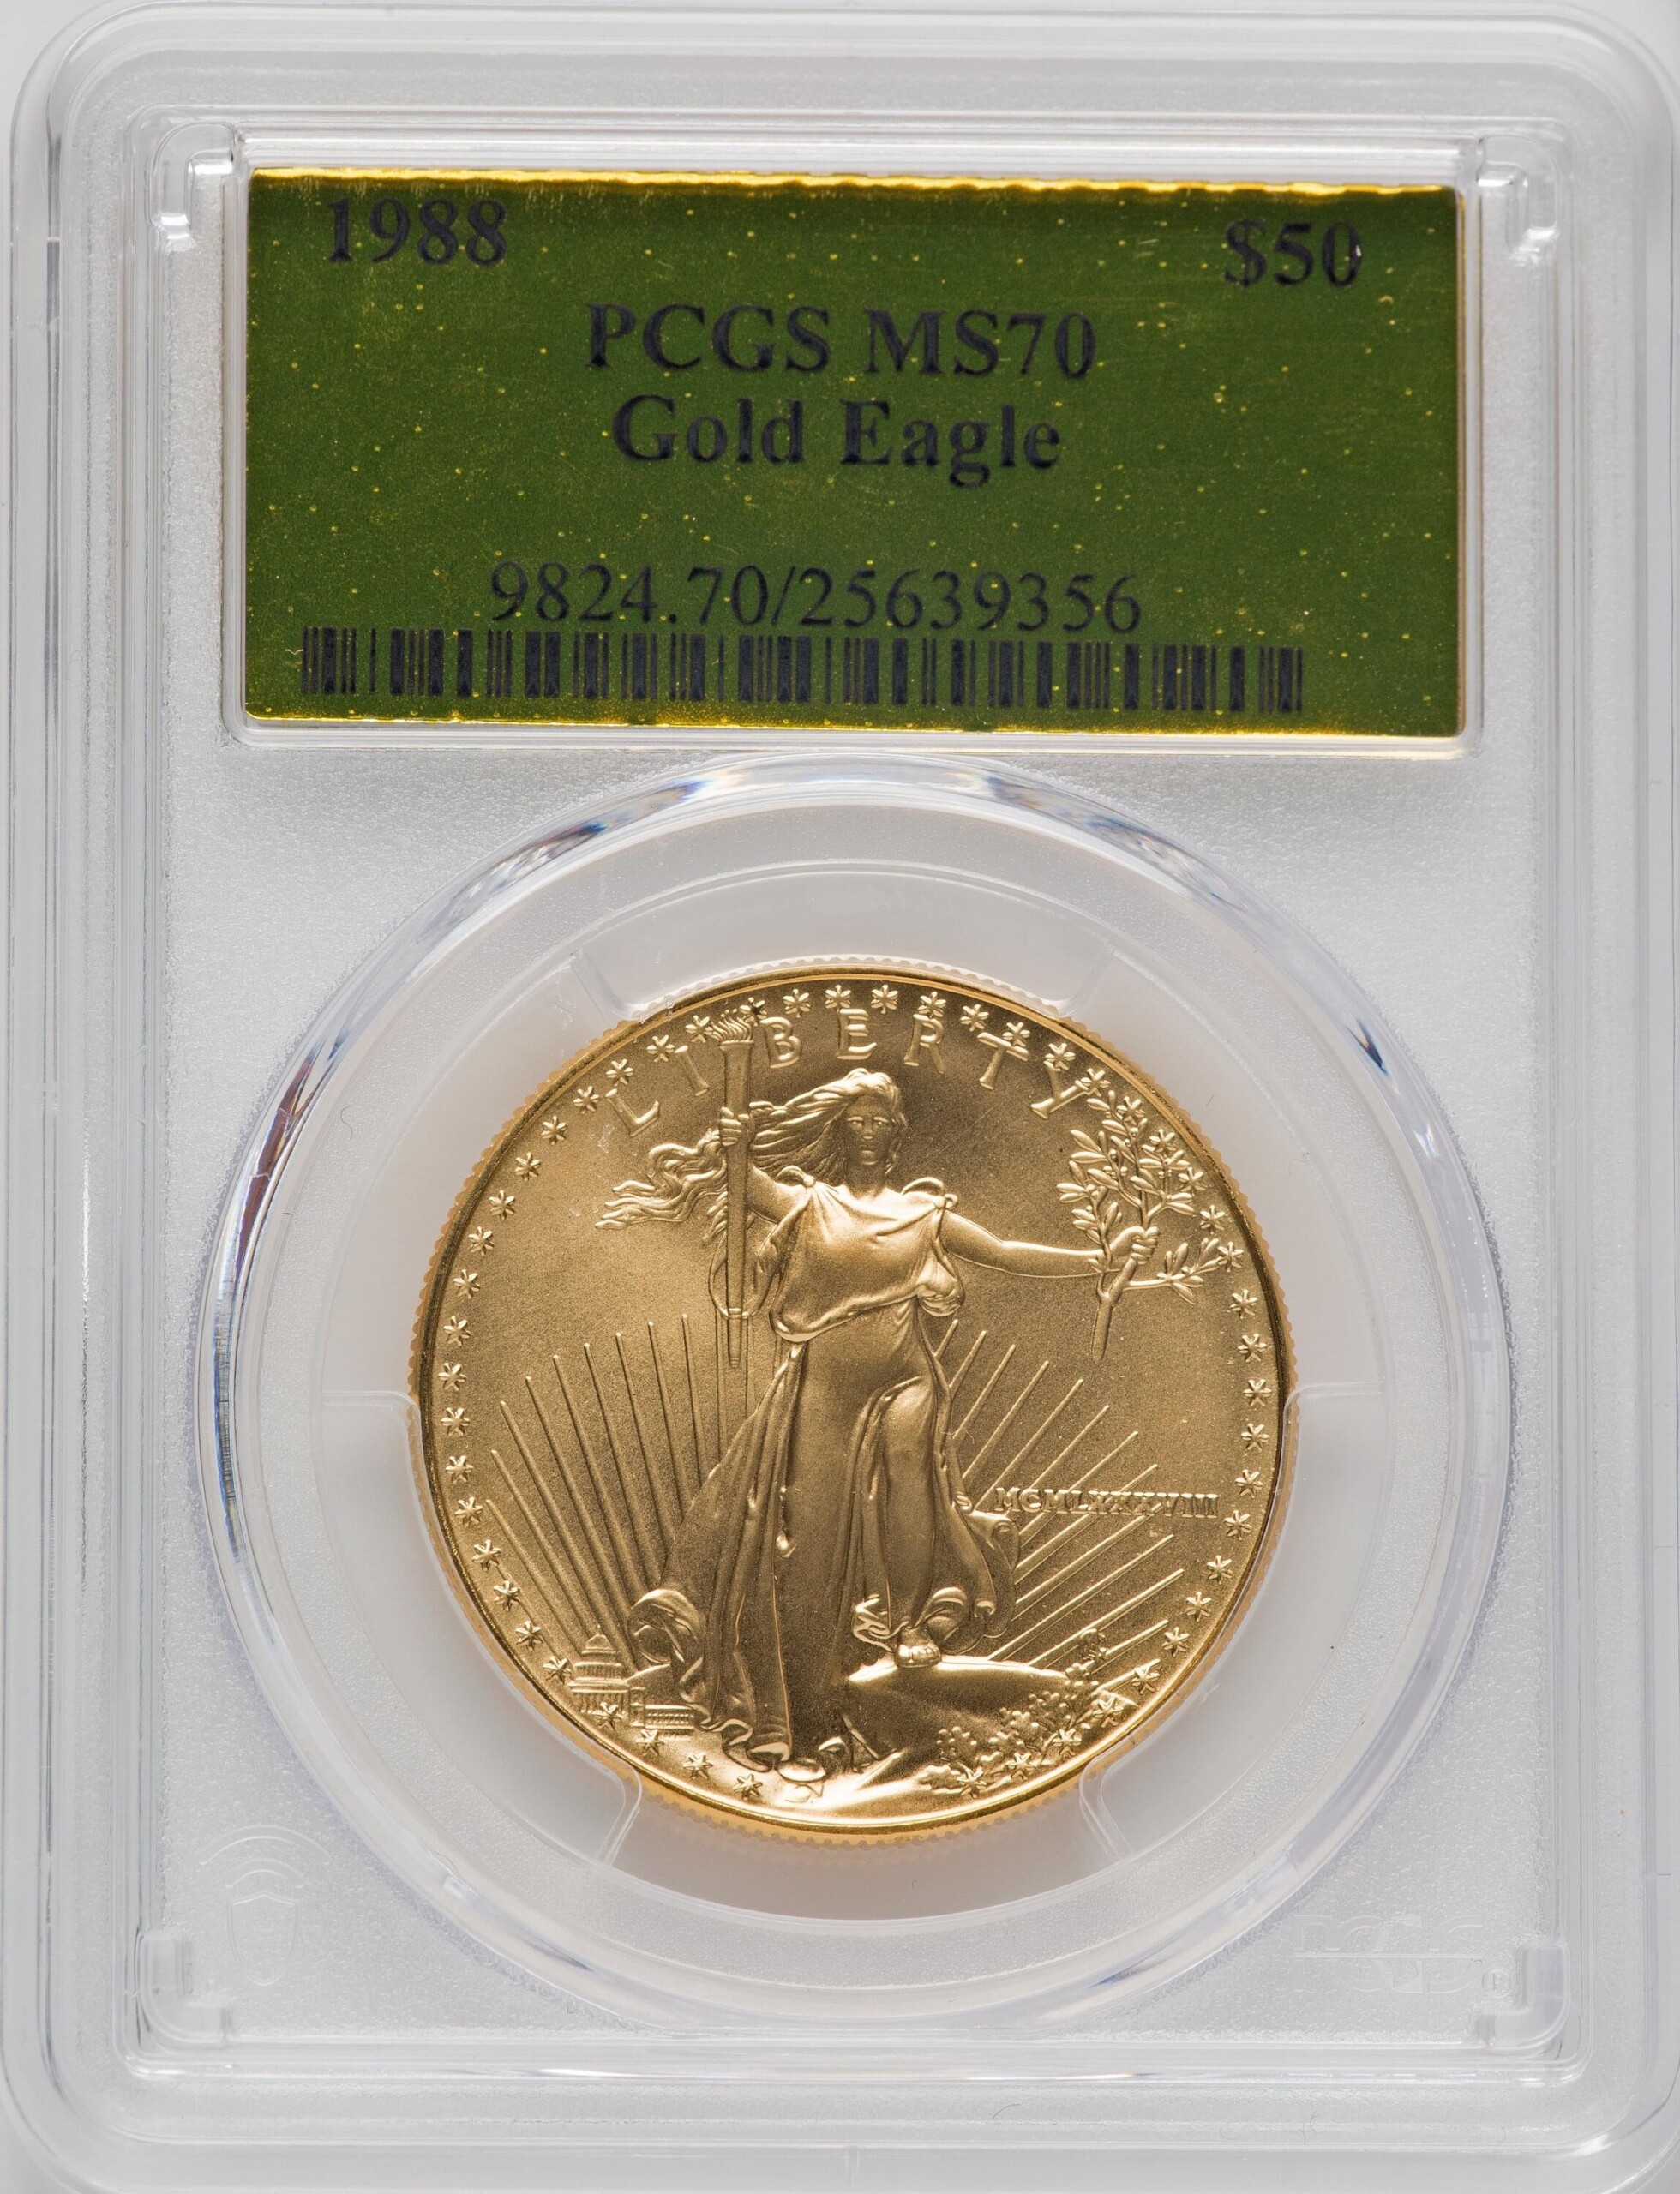 1988 $50 One-Ounce Gold Eagle, MS 70 PCGS